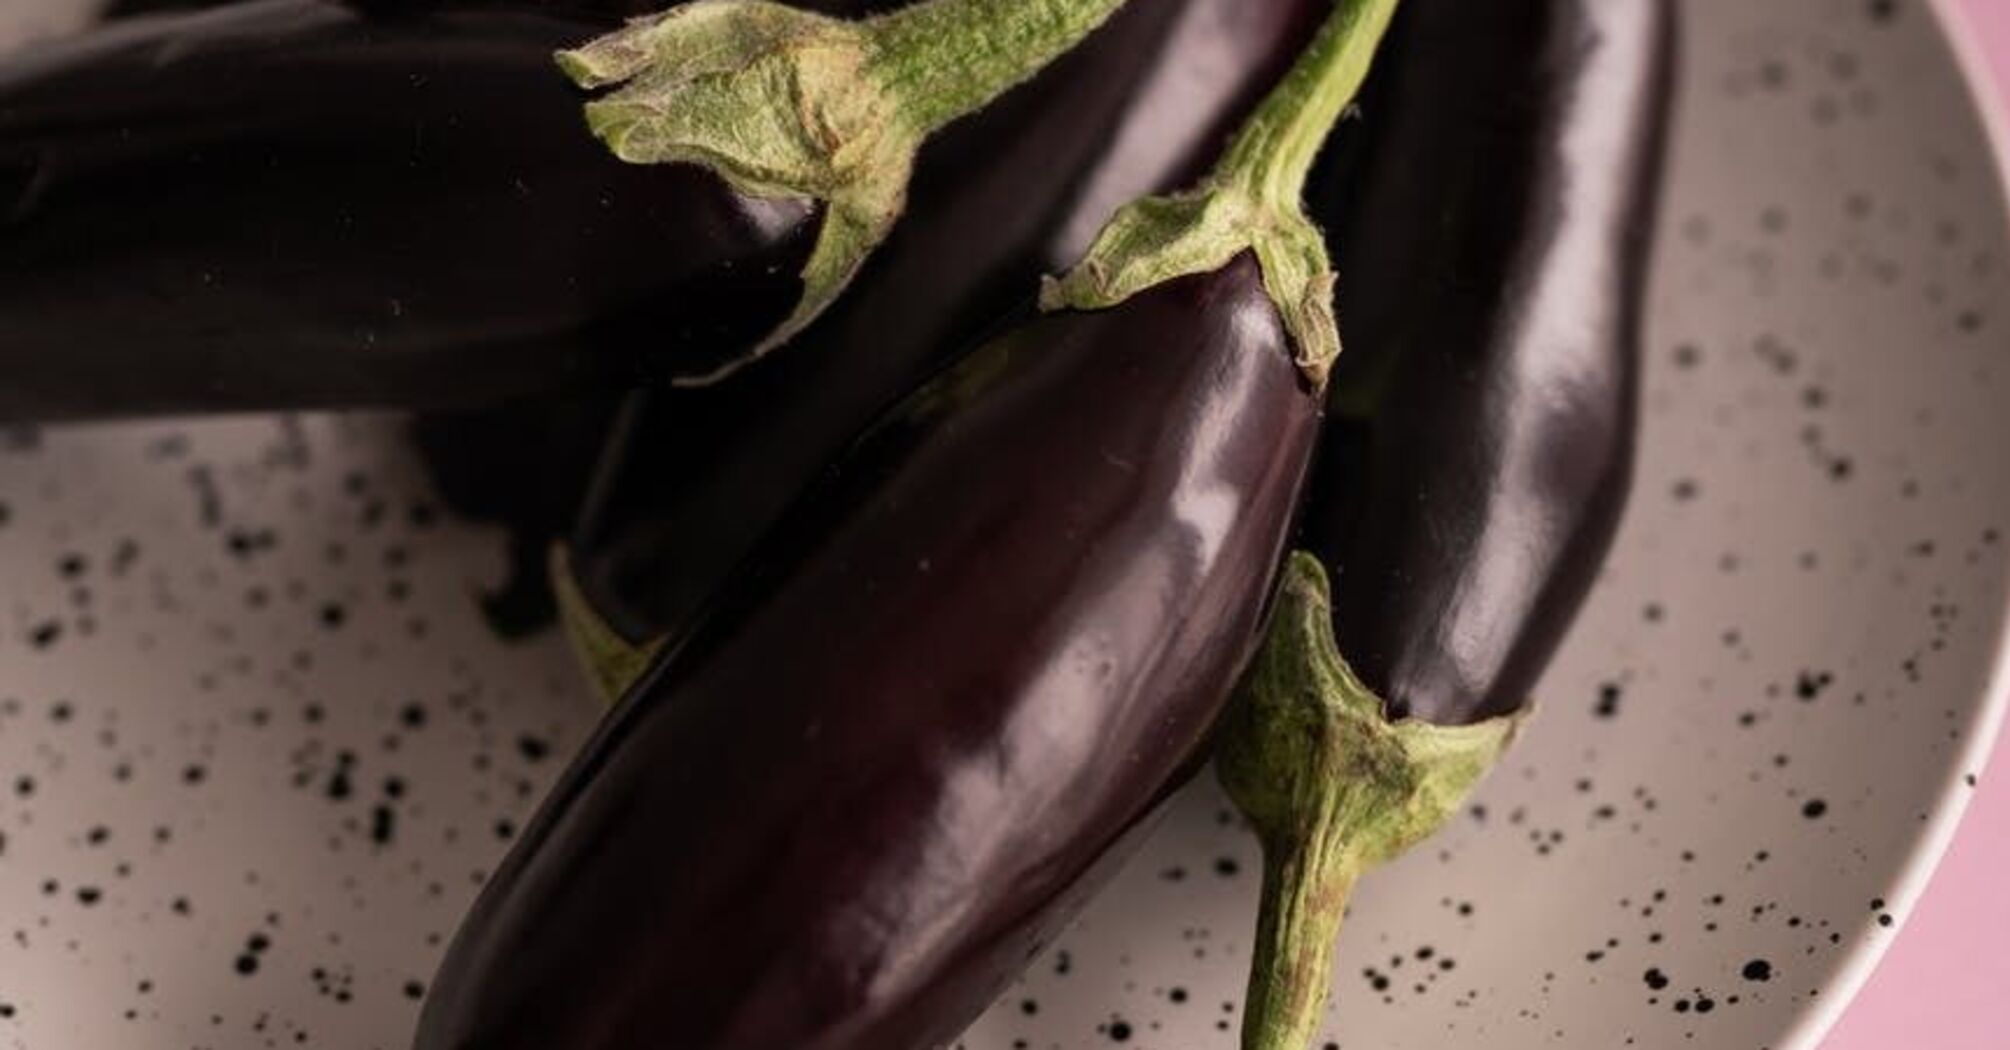 How to cook eggplant deliciously: a budget dish idea